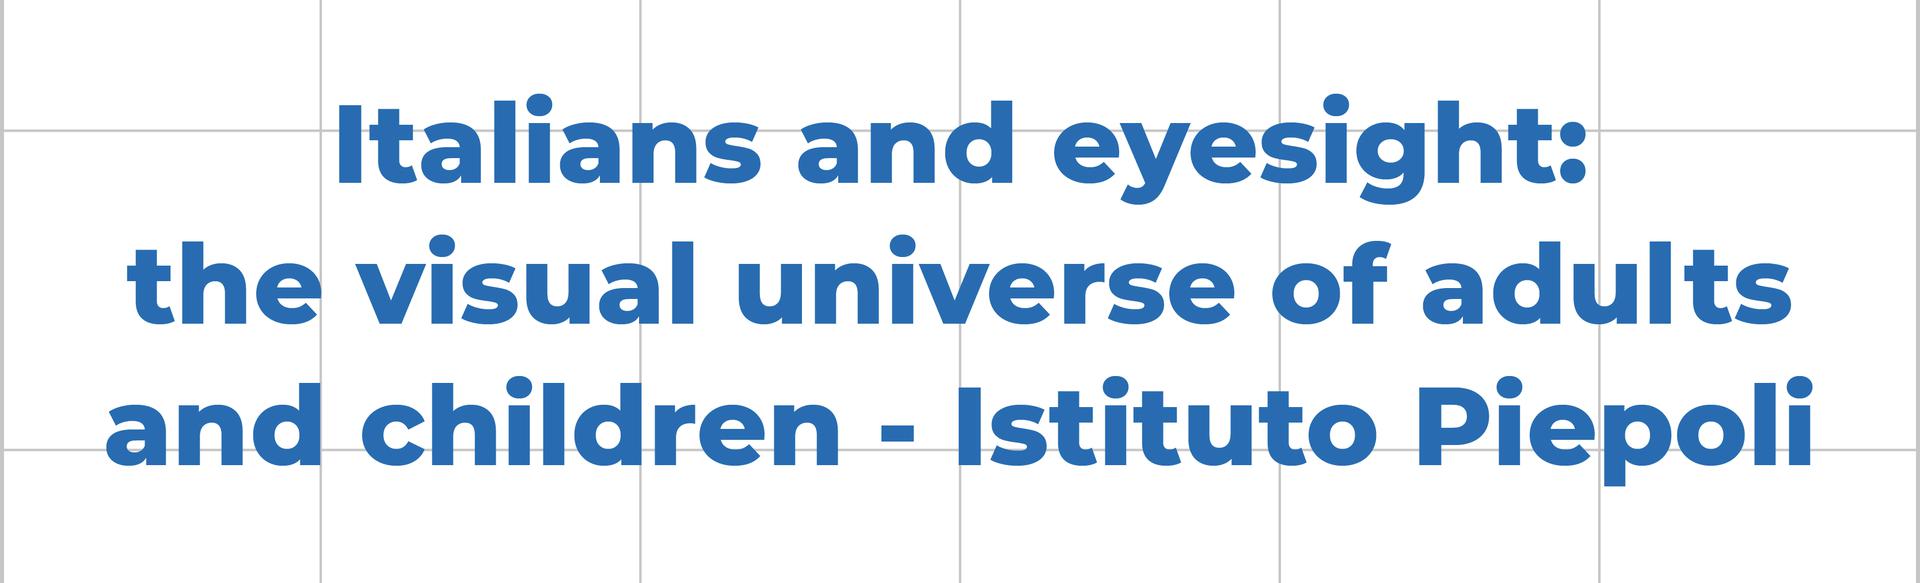 Italians and eyesight: the visual universe of adults and children - Istituto Piepoli